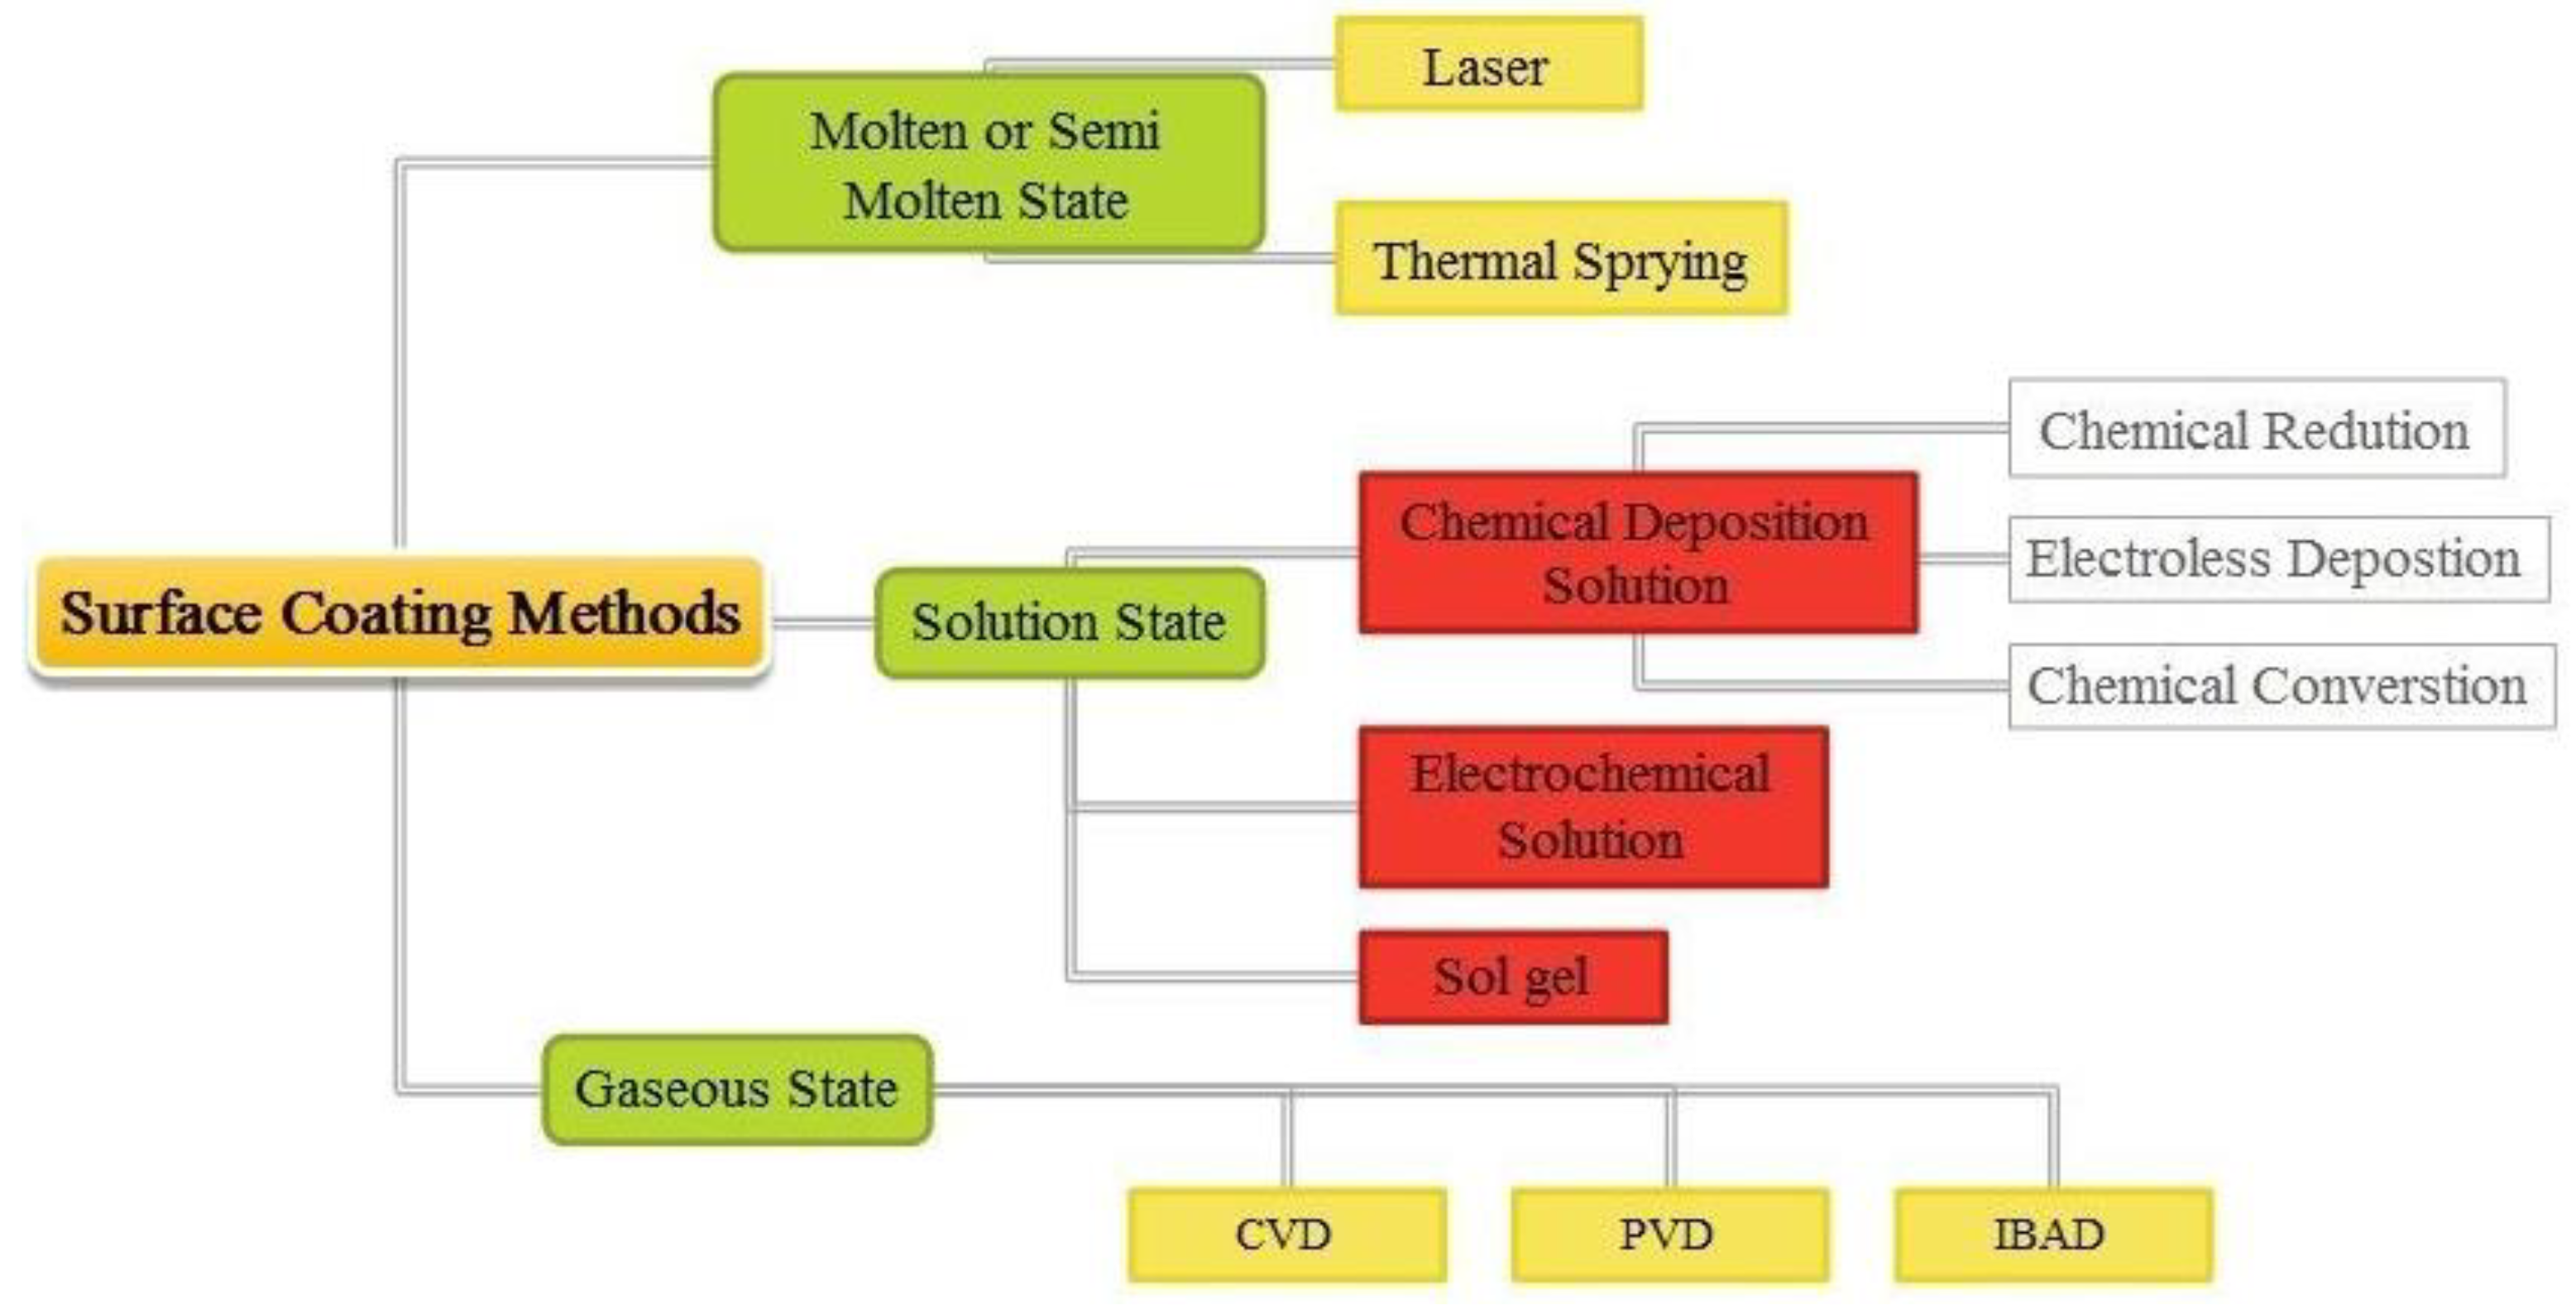 Materials Free Full-Text Advancements in Nickel-Phosphate/Boron Based Electroless Composite Coatings A Comprehensive Review of Mechanical Properties and Recent Developments